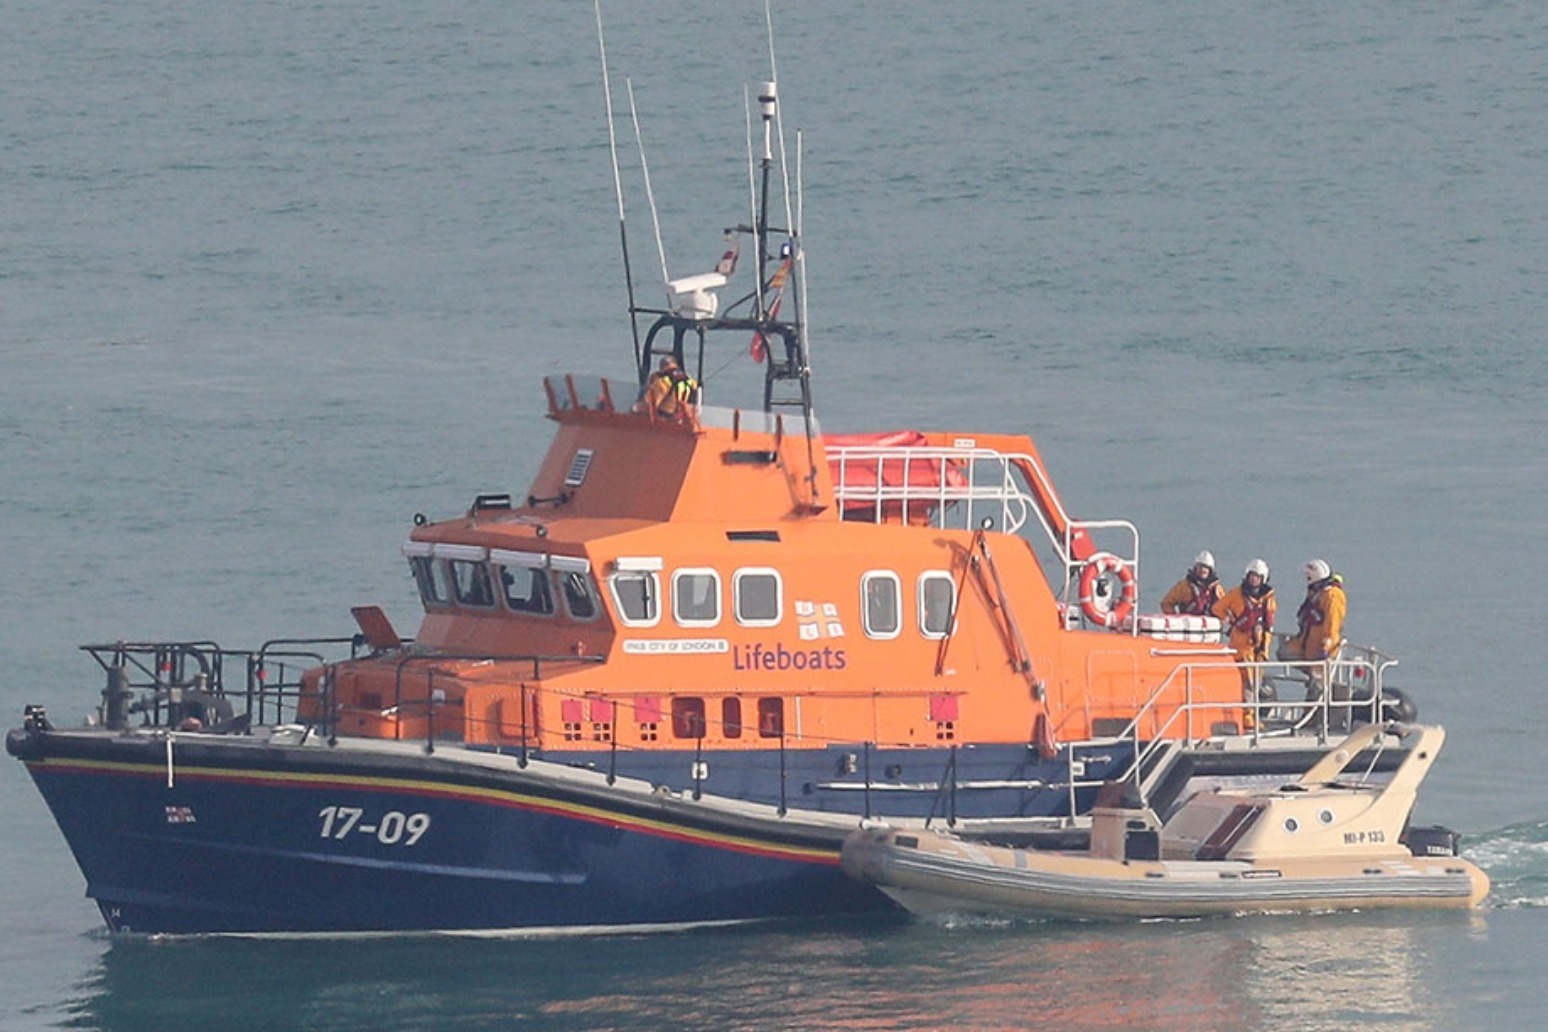 RNLI takes down its website after reporting suspicious activity thumbnail